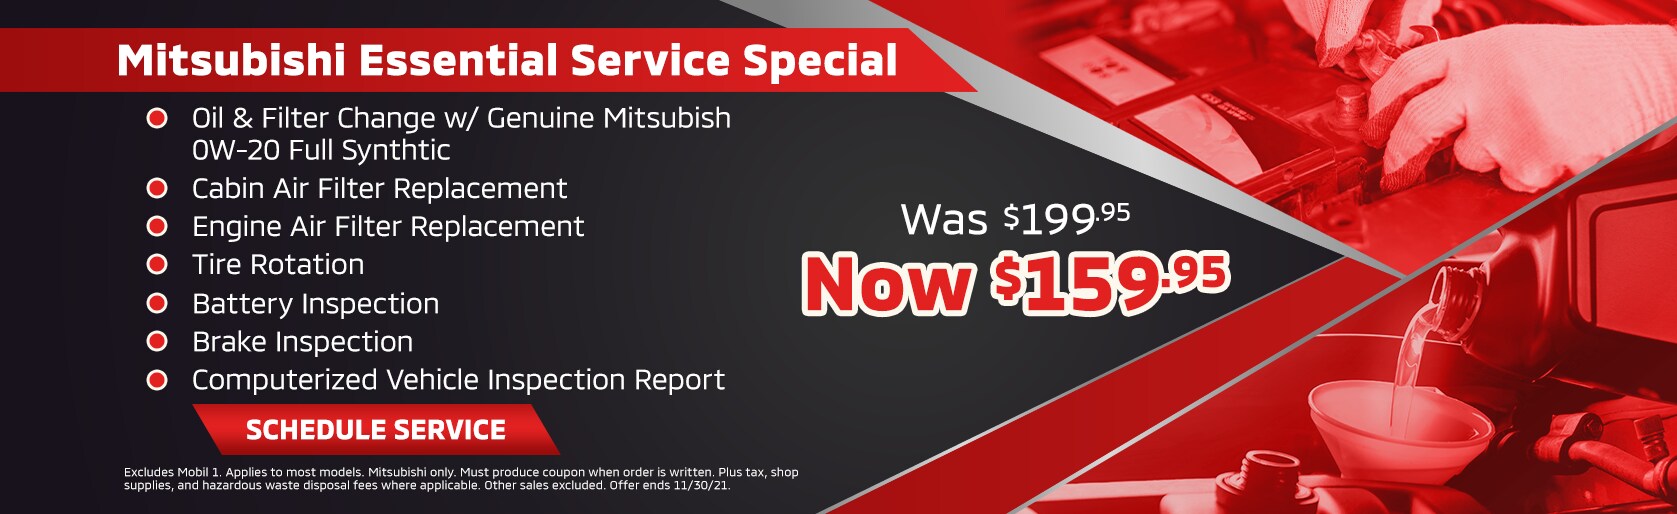 Essential Service Coupon Special